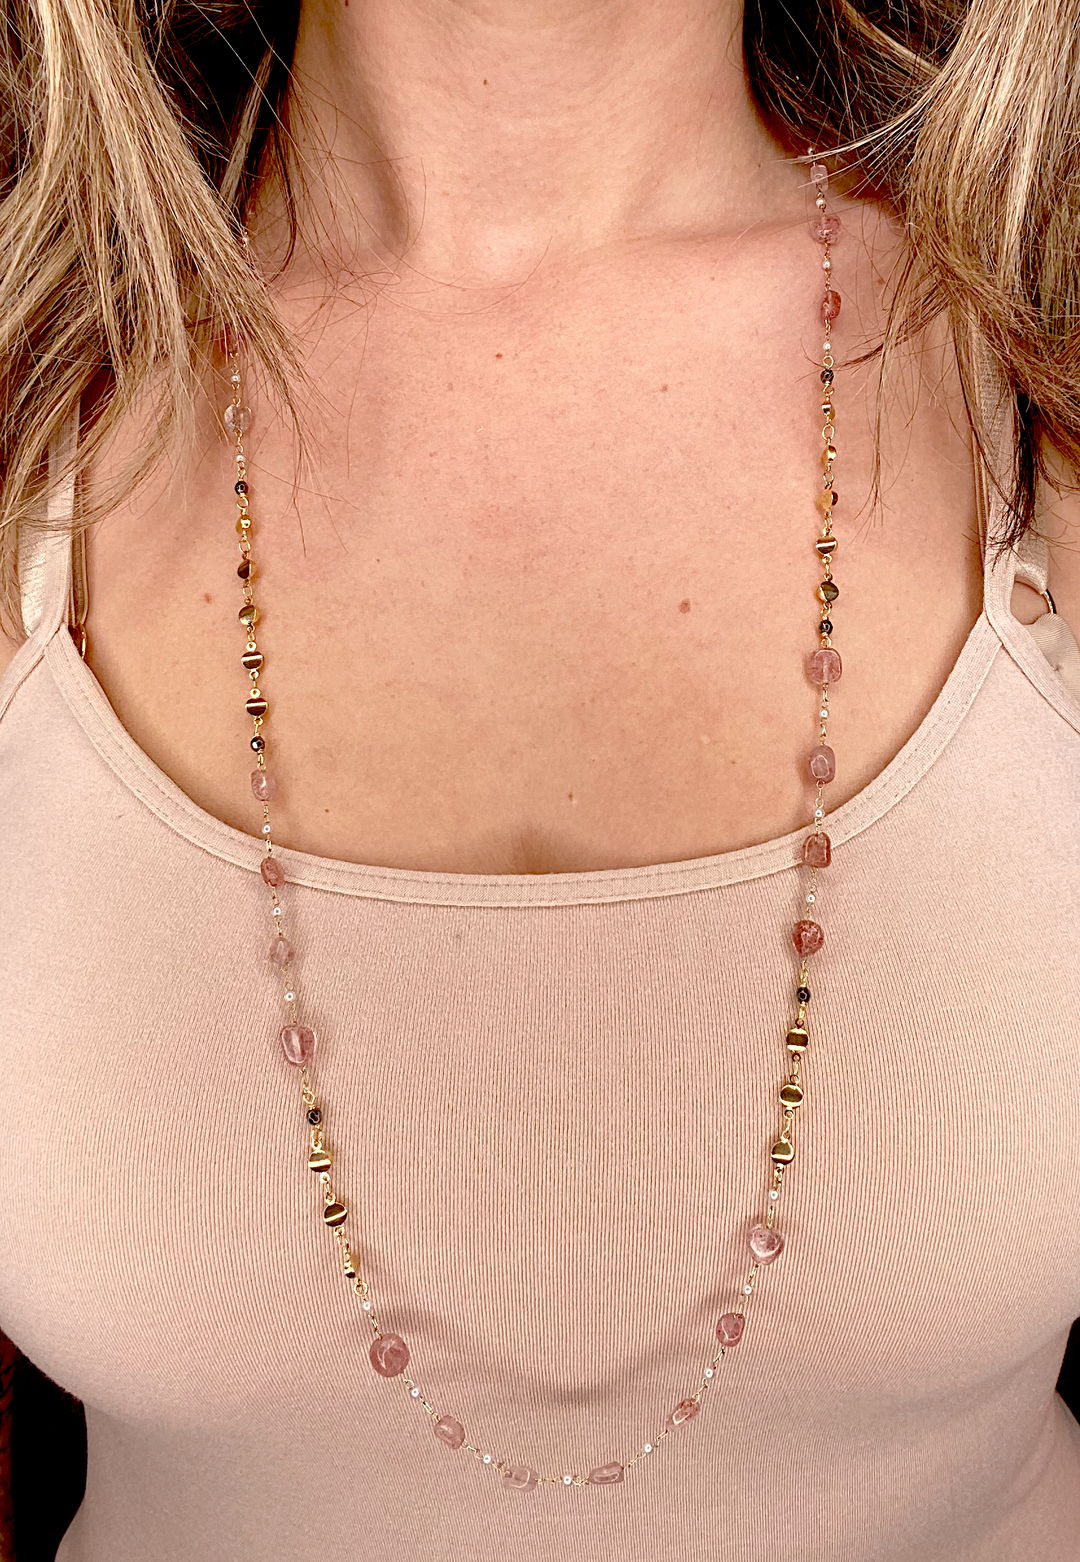 AGATE AND GLASS BEAD CHAIN - Kingfisher Road - Online Boutique